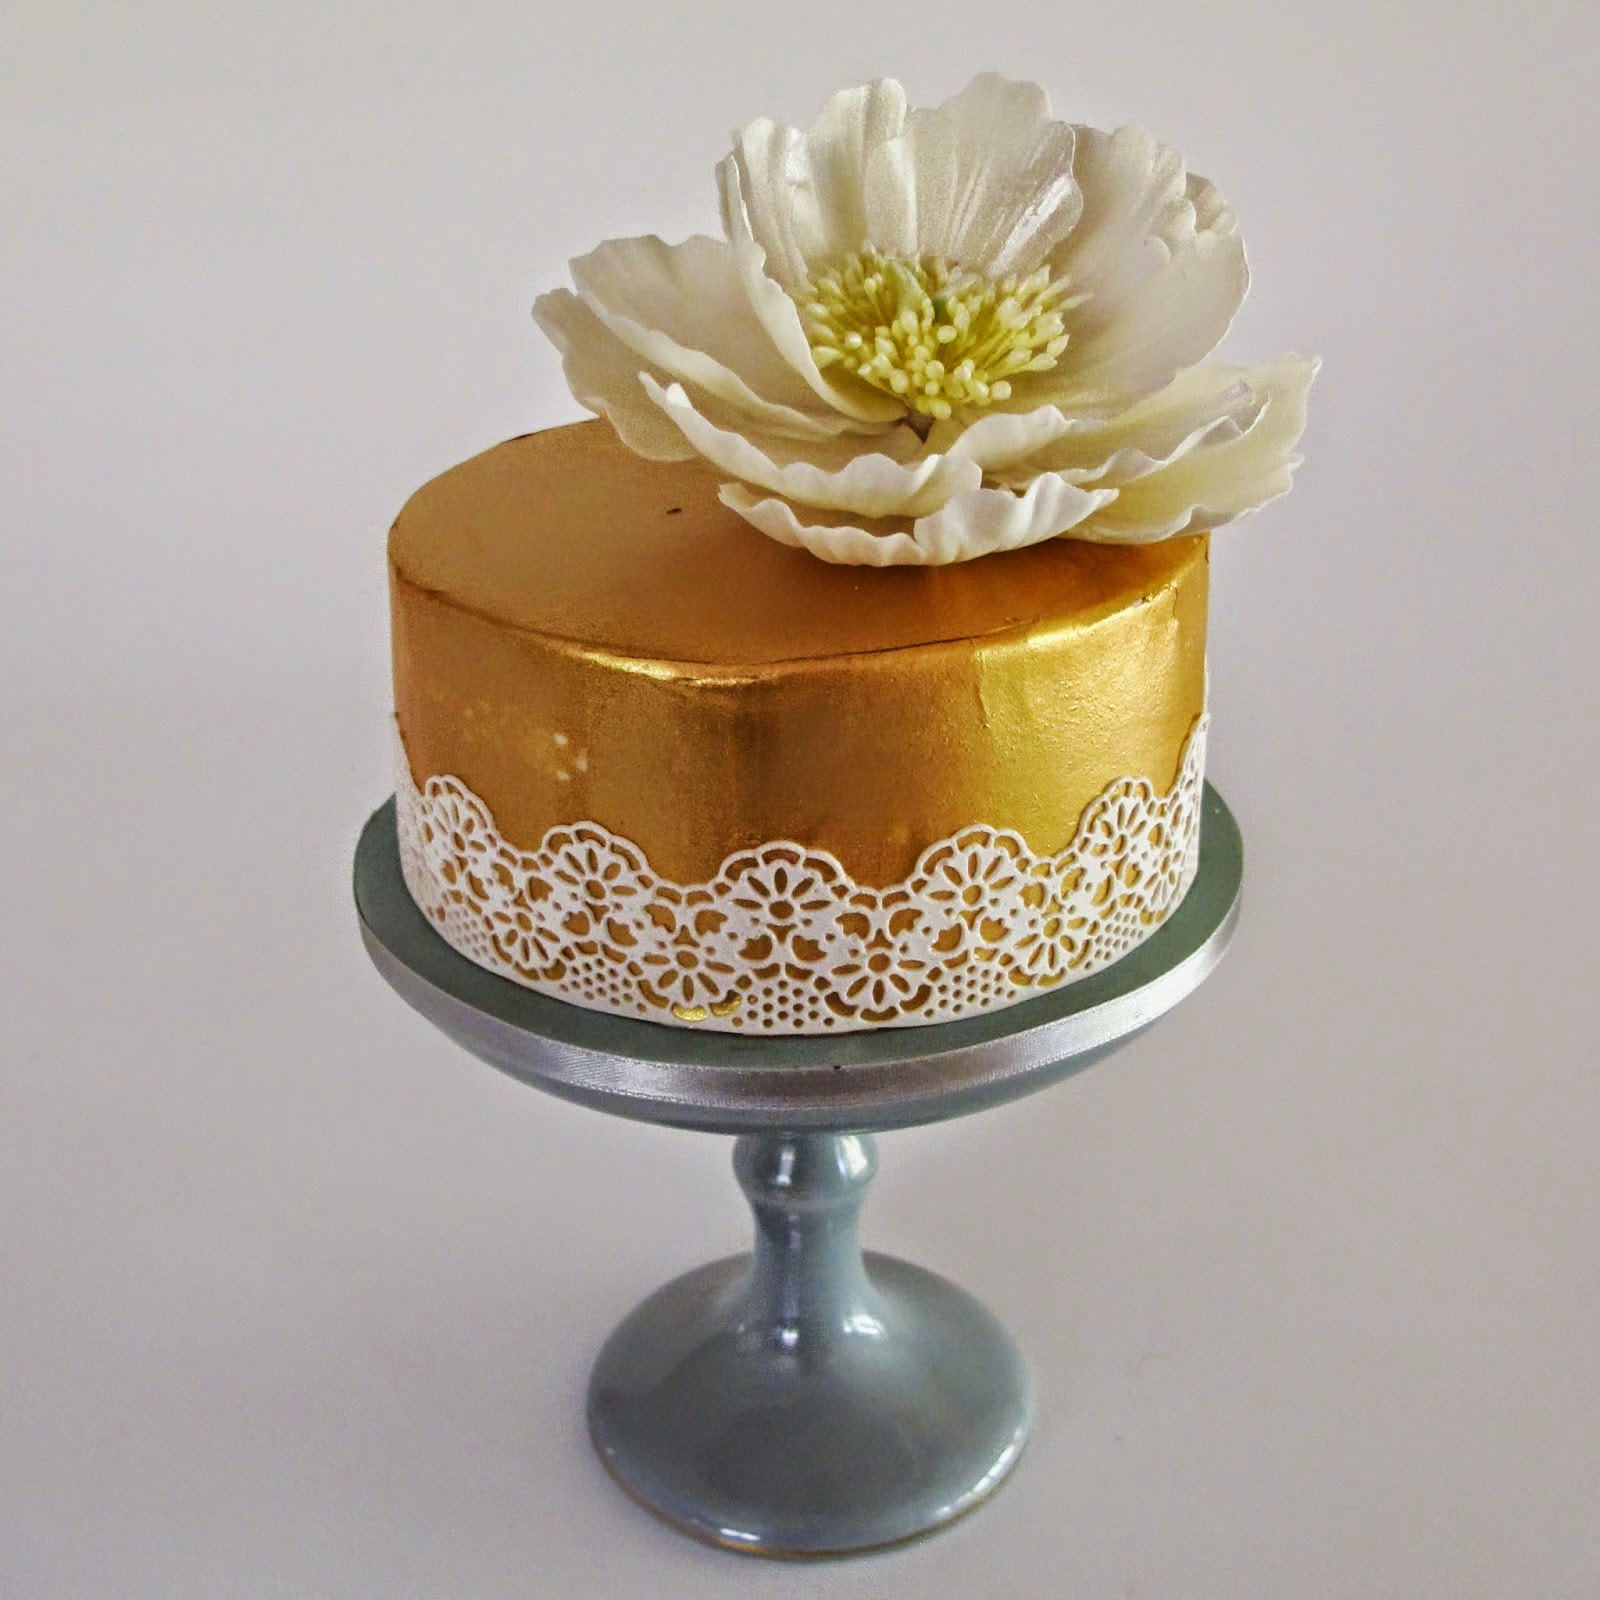 Gold Leaf Cake Tutorial - Ashlee Marie - real fun with real food